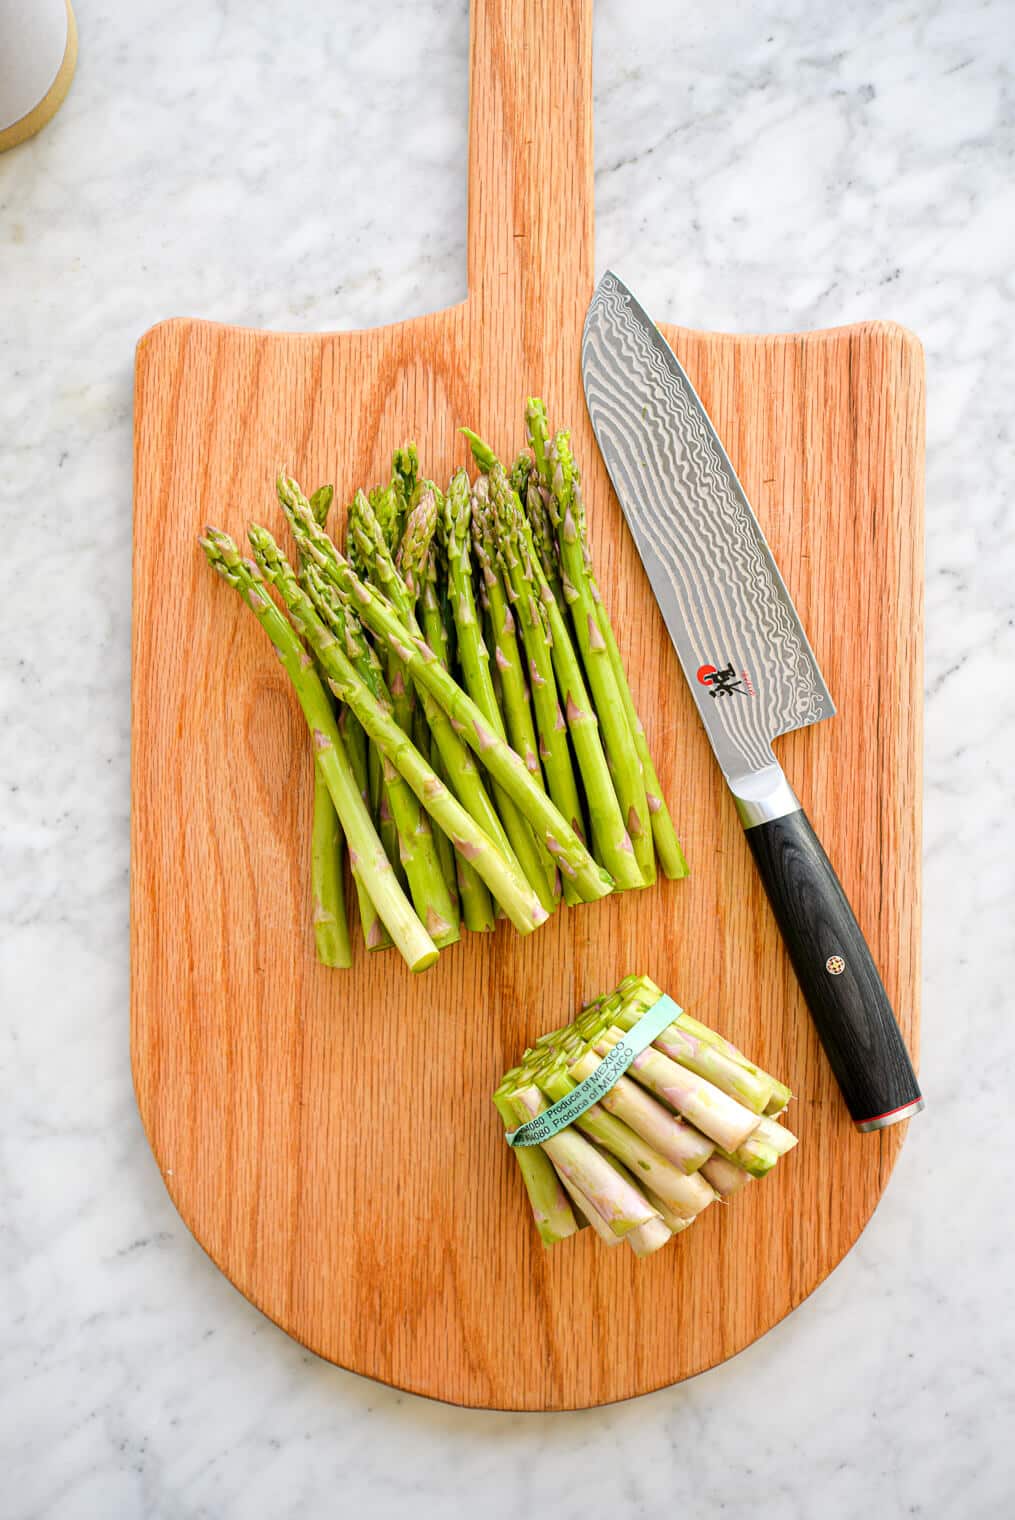 One bunch of asparagus with the bottoms chopped off just above the green rubber band sitting on a cutting board with a silver chef's knife with black handle